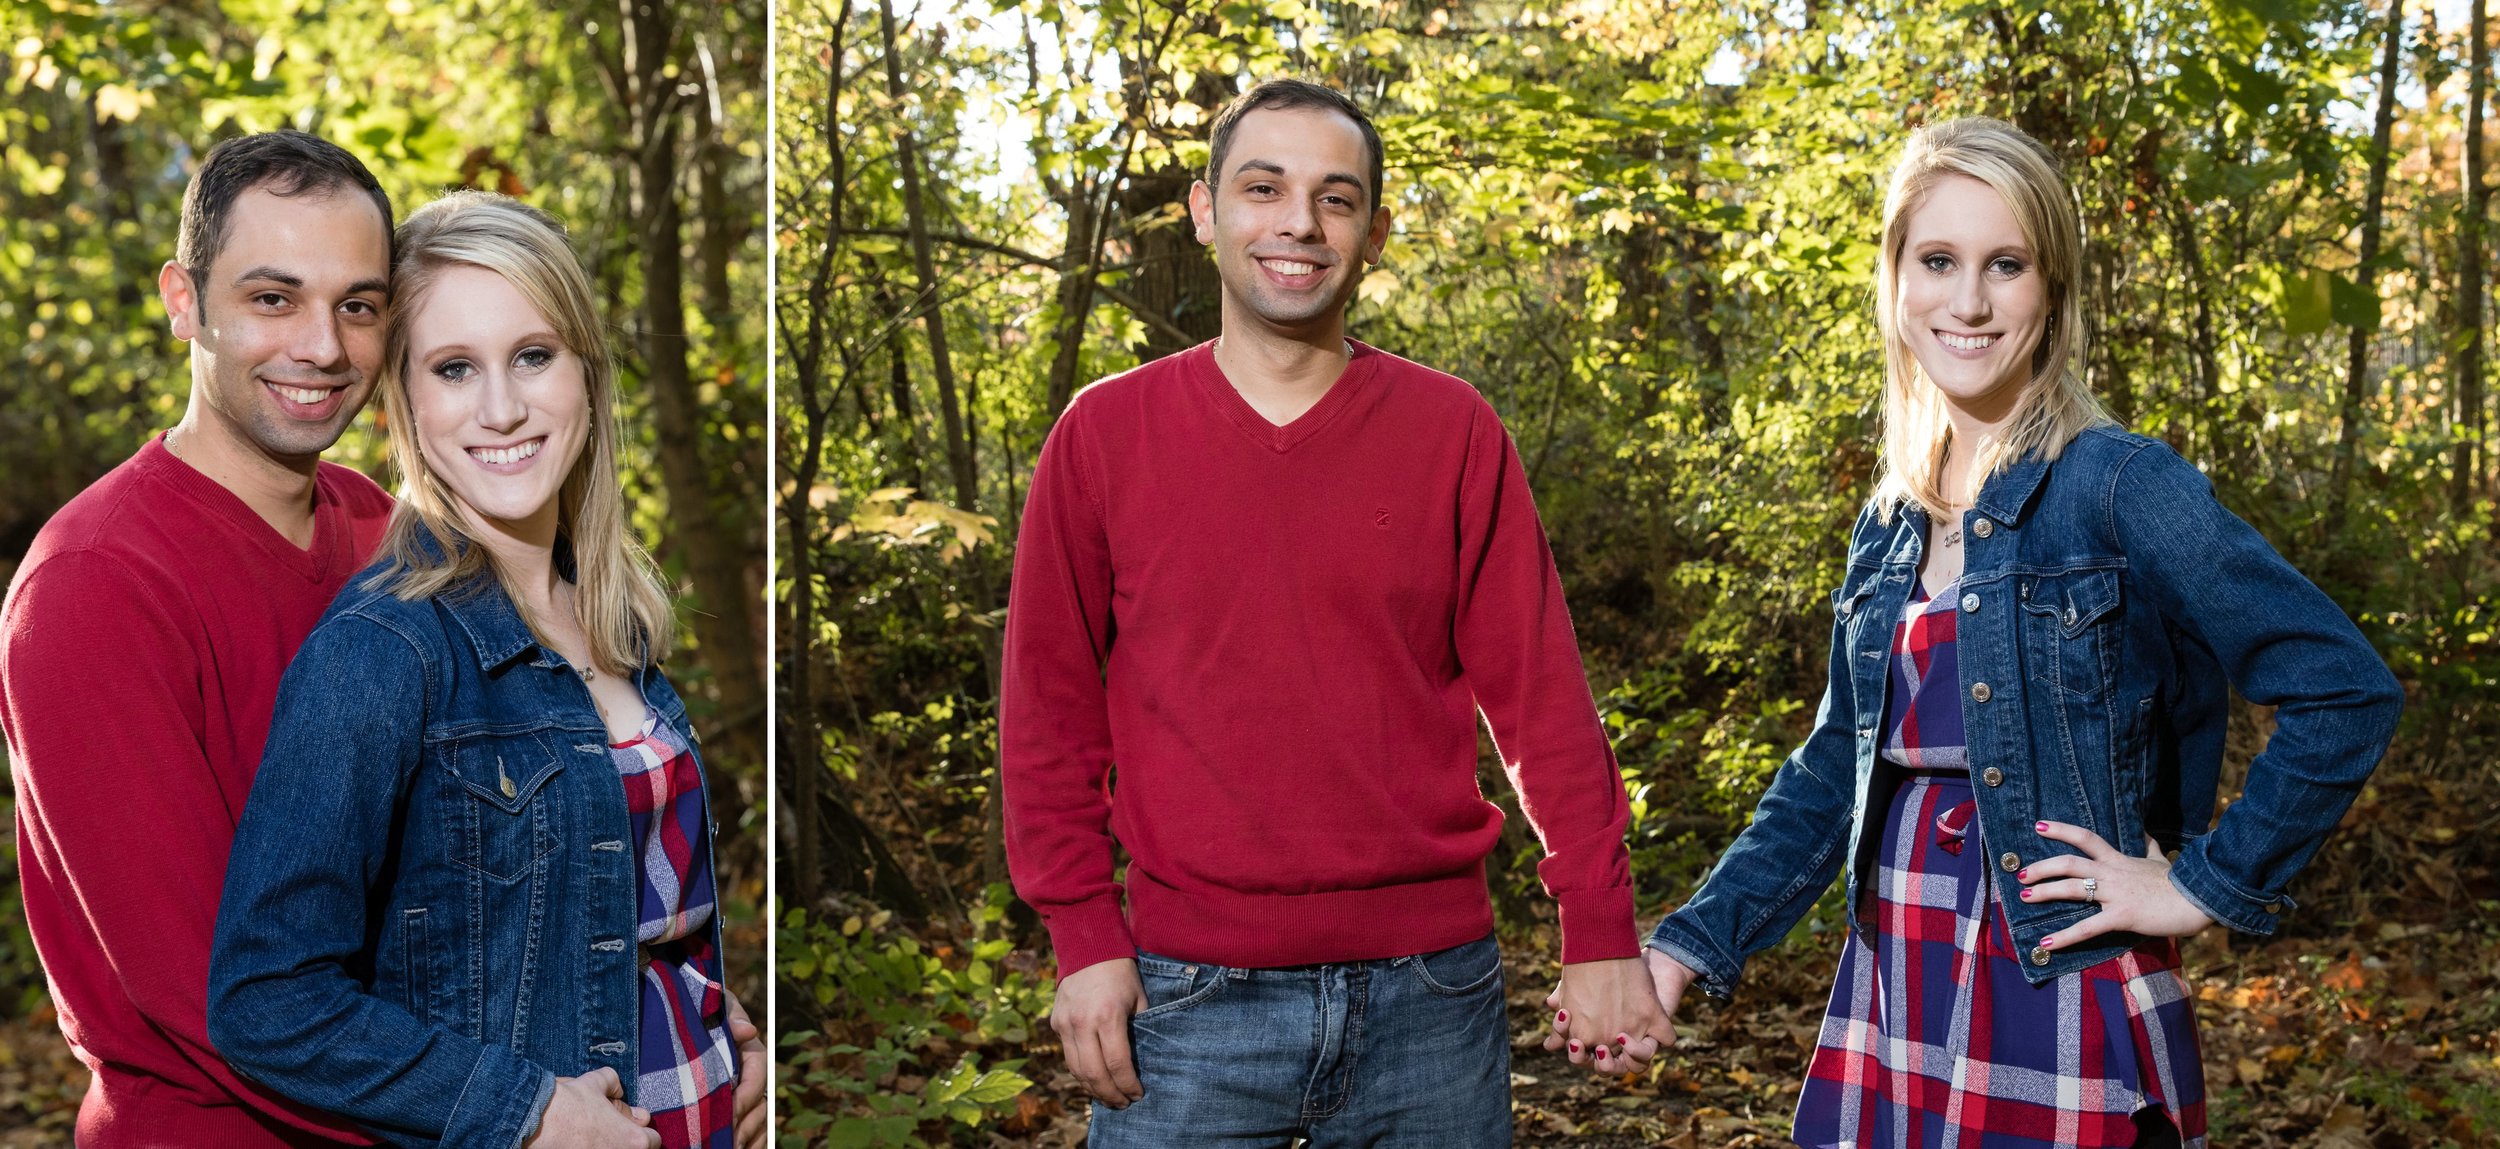 westerville-ohio-fall-outdoor-engagement-session-gahanna-wedding-photography-muschlitz-photography-005.JPG